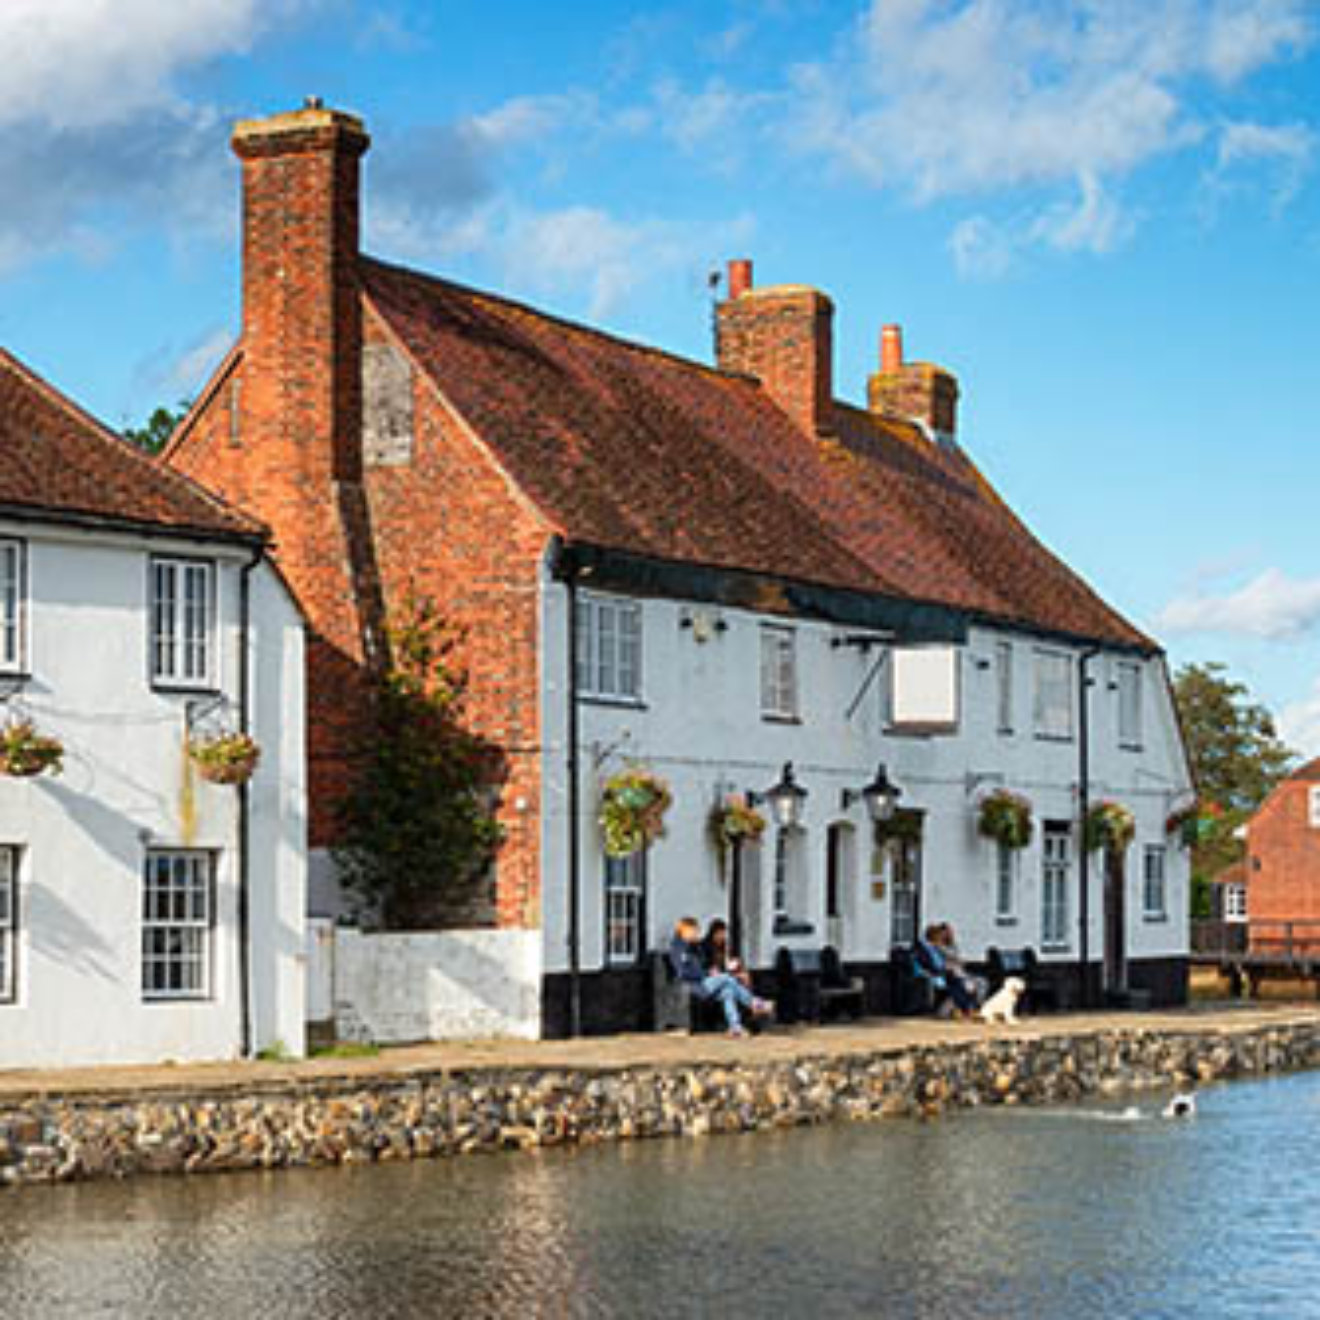 Pretty cottages and an old mill at Langstone Quay near Havant in Hampshire